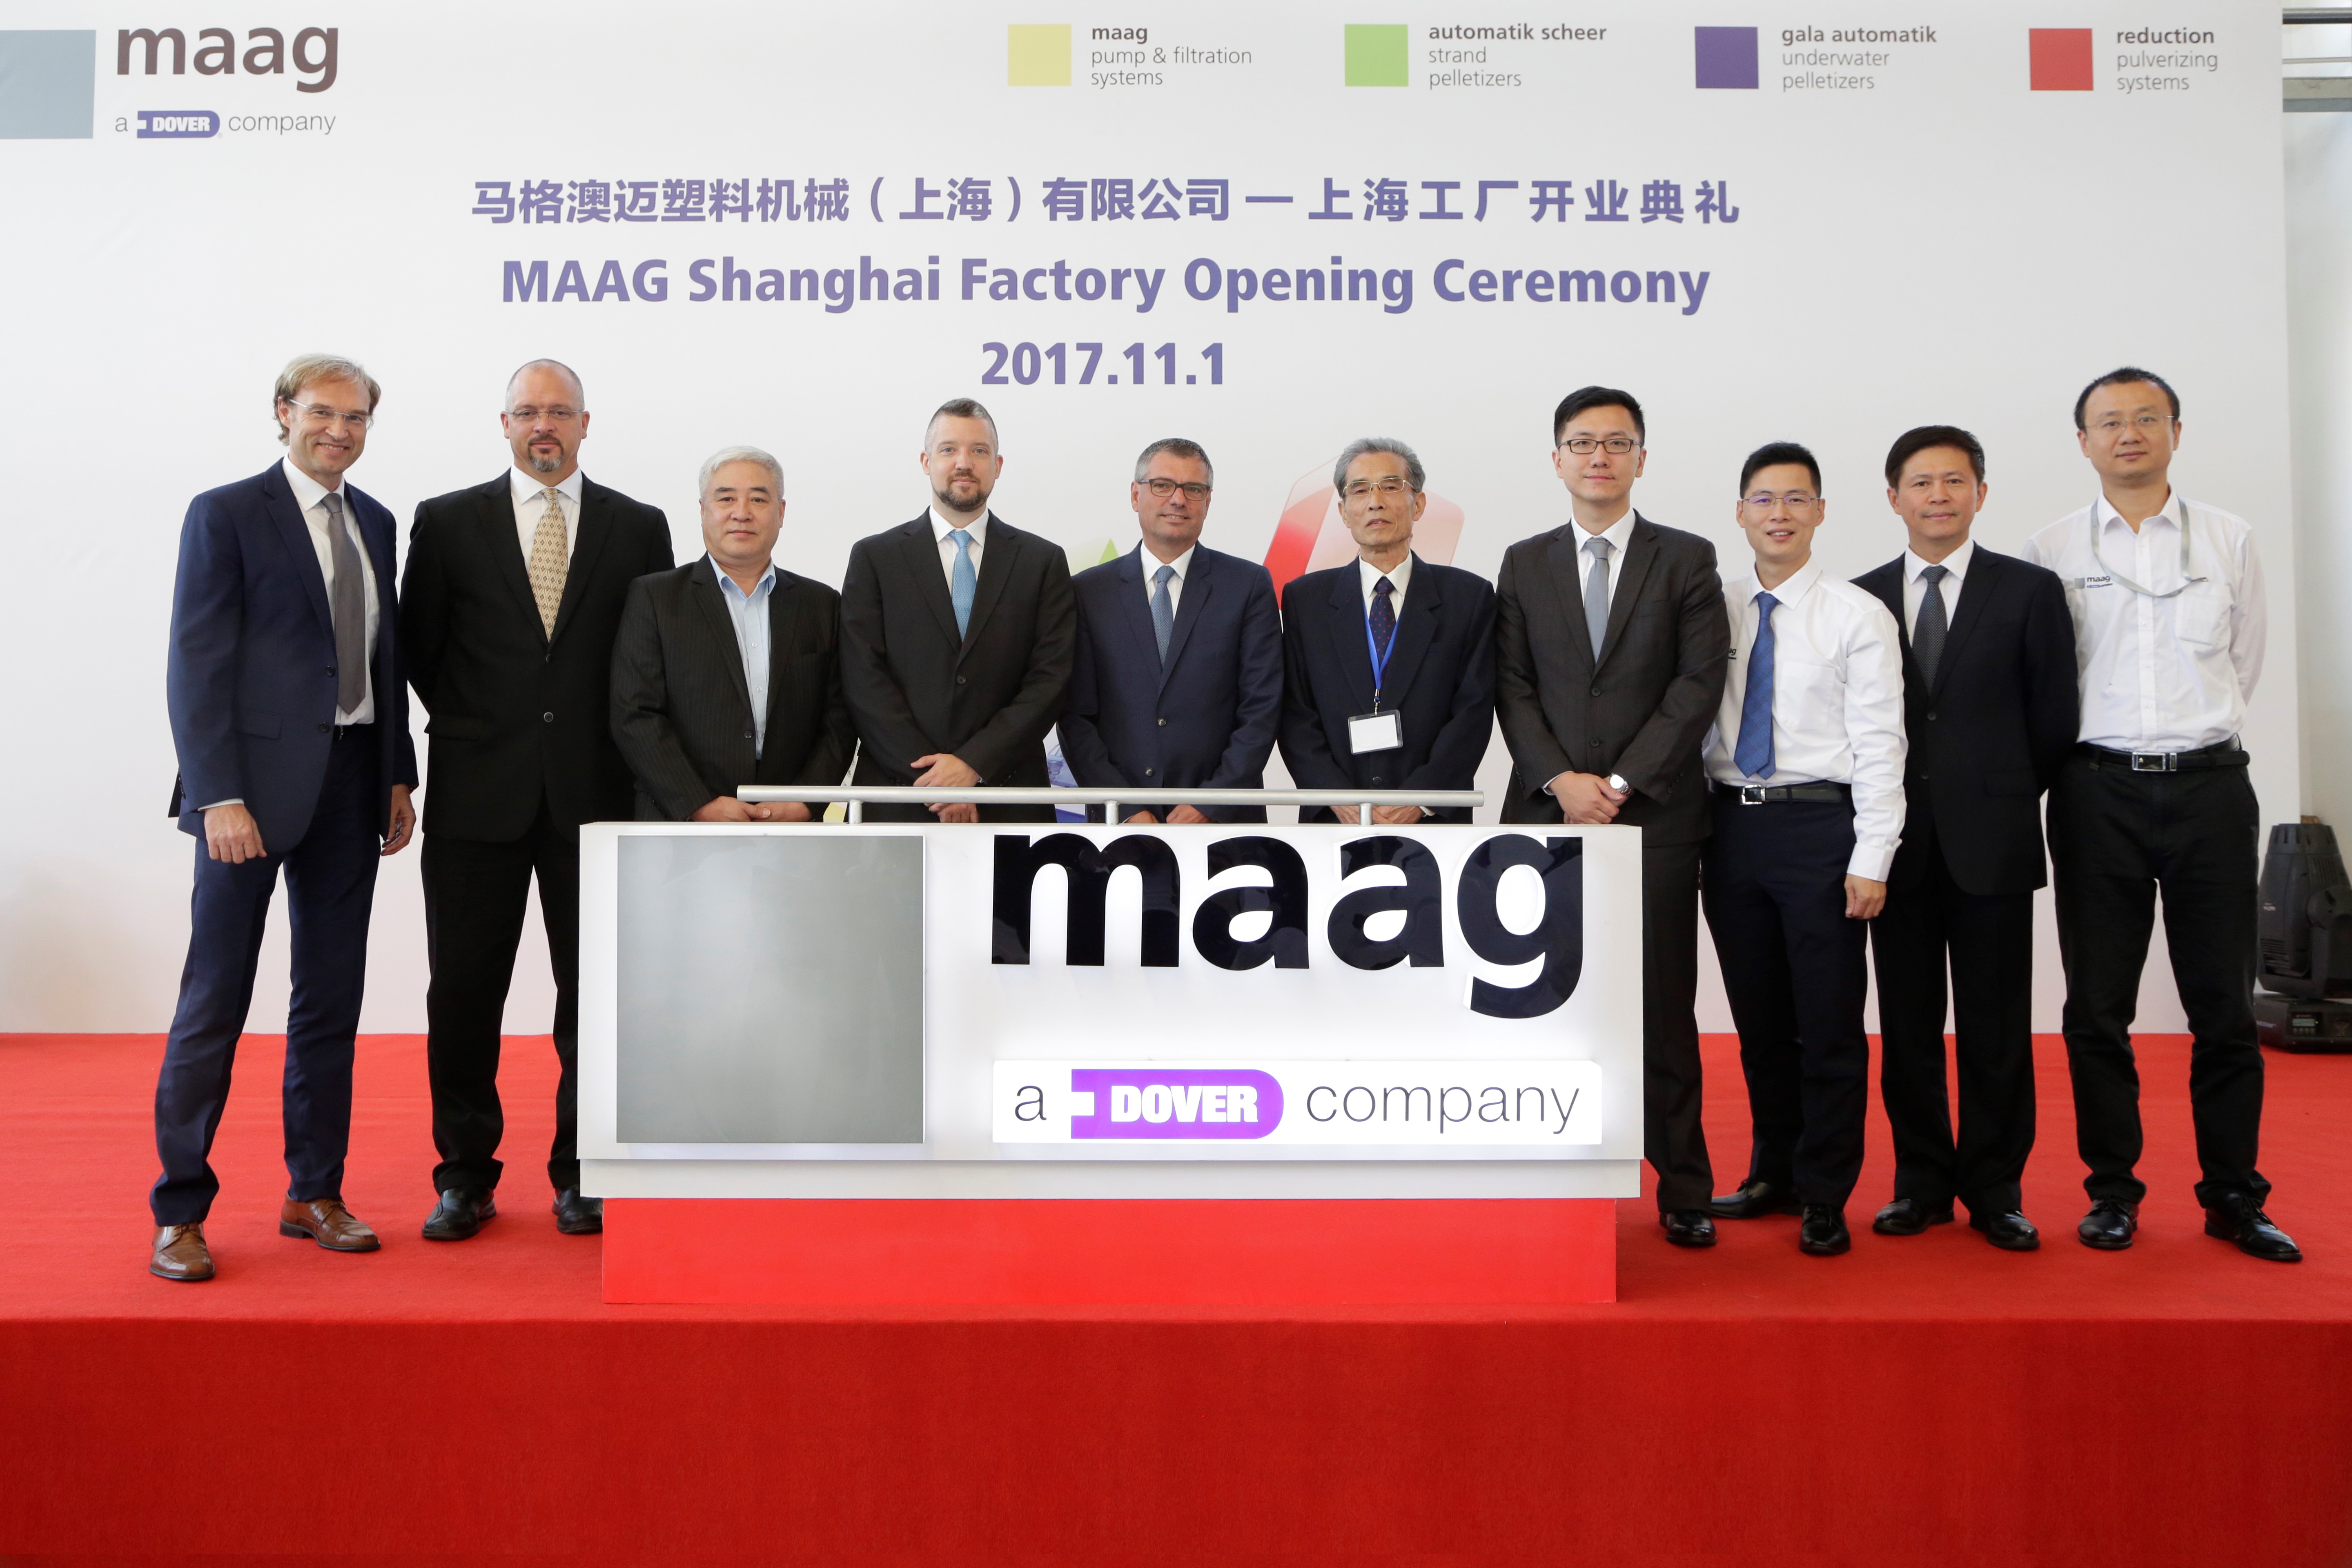 The opening ceremony at Maag Shanghai, China was attended by Ueli Thuerig, president of Maag and Paul Merich, vice president and general manager of Maag in Greater China.